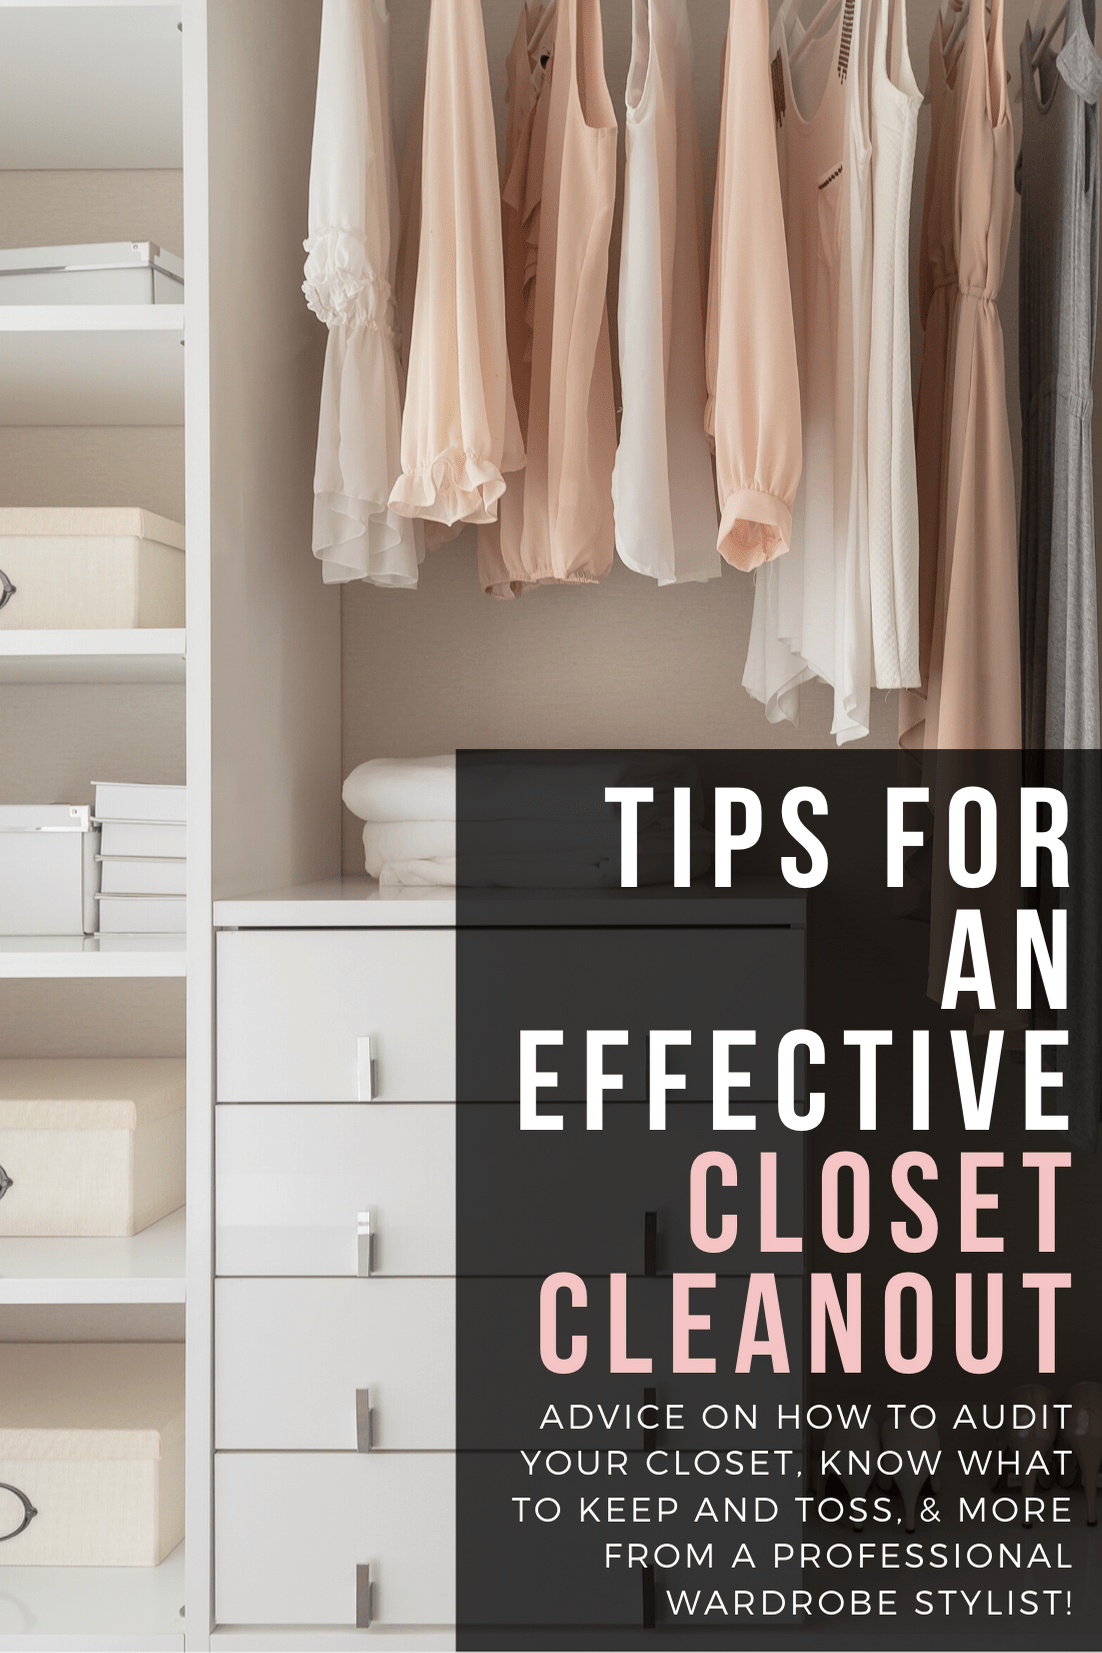 https://www.wardrobeoxygen.com/wp-content/uploads/2020/04/tips-for-performing-a-closet-cleanout.png